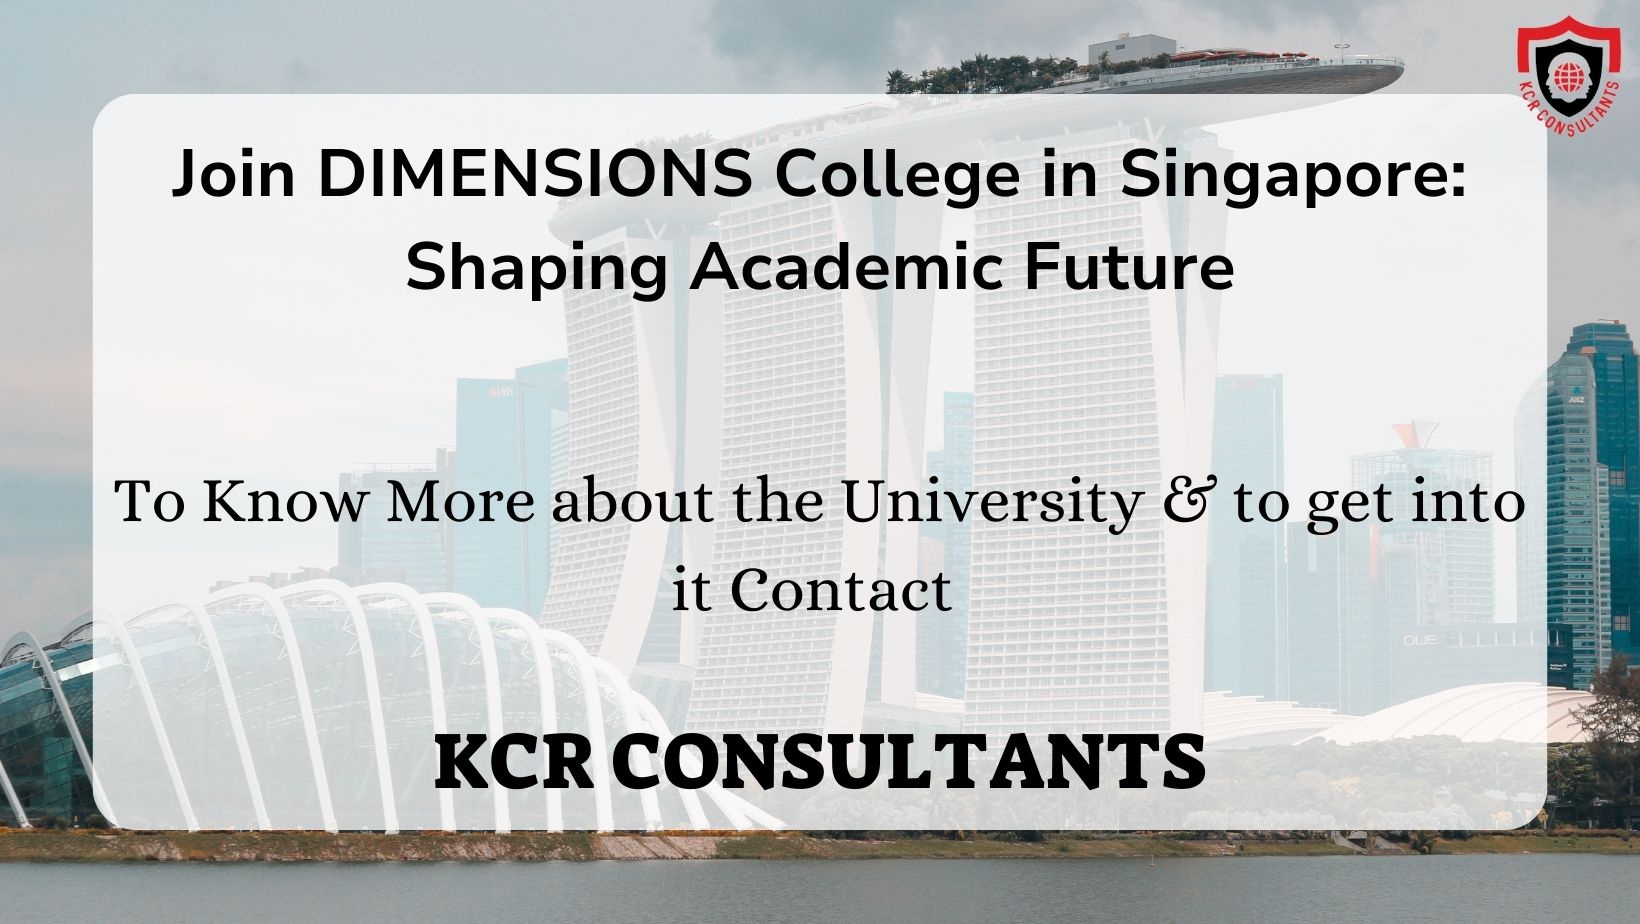 DIMENSIONS College - KCR CONSULTANTS - Singapore - Contact us